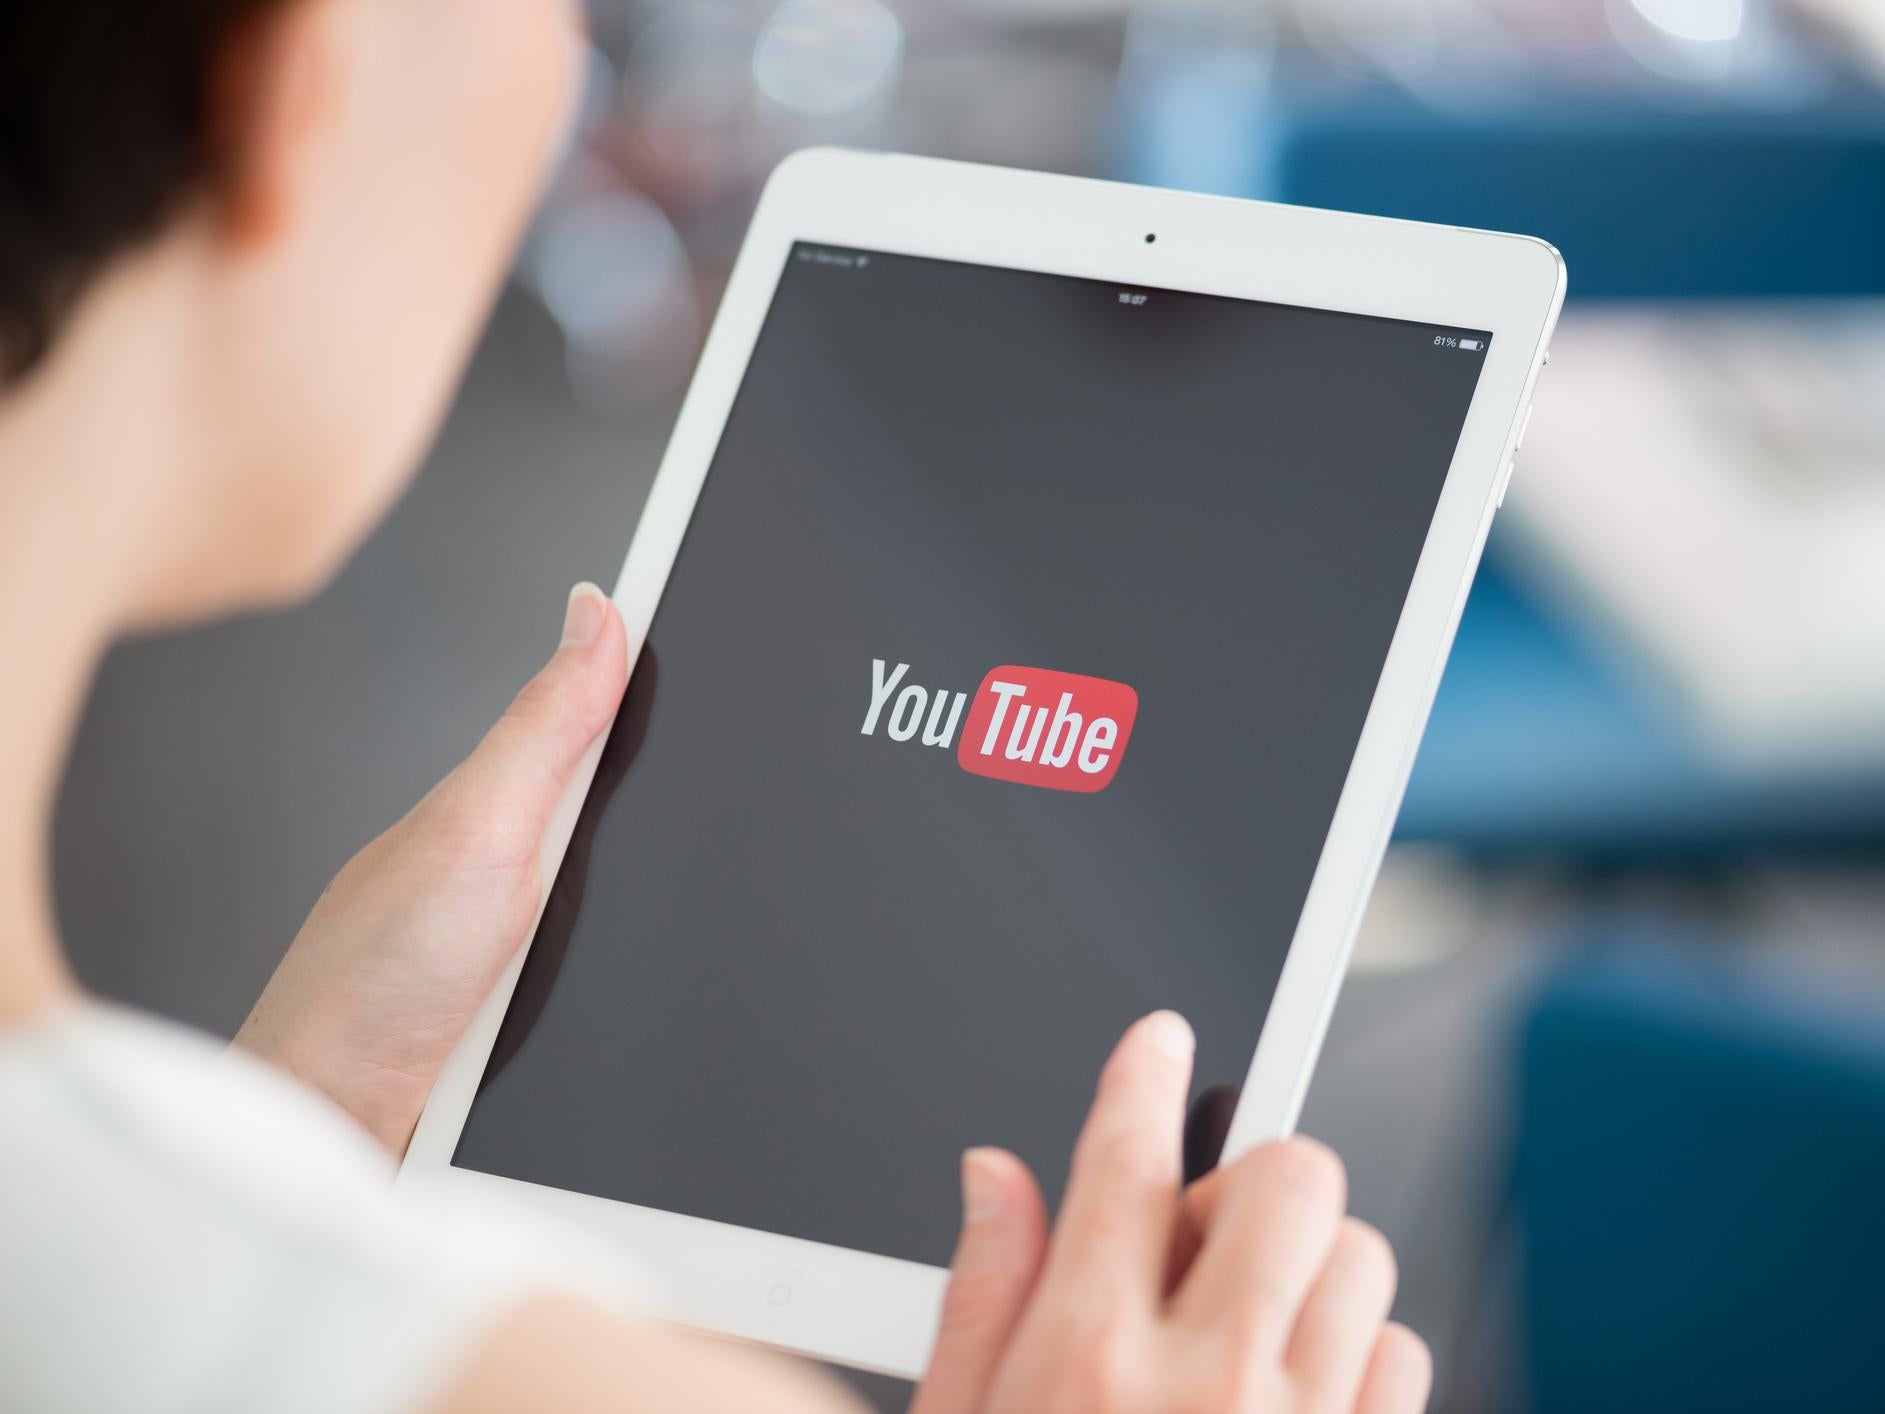 Young children can easily see disturbing content on YouTube despite age restrictions